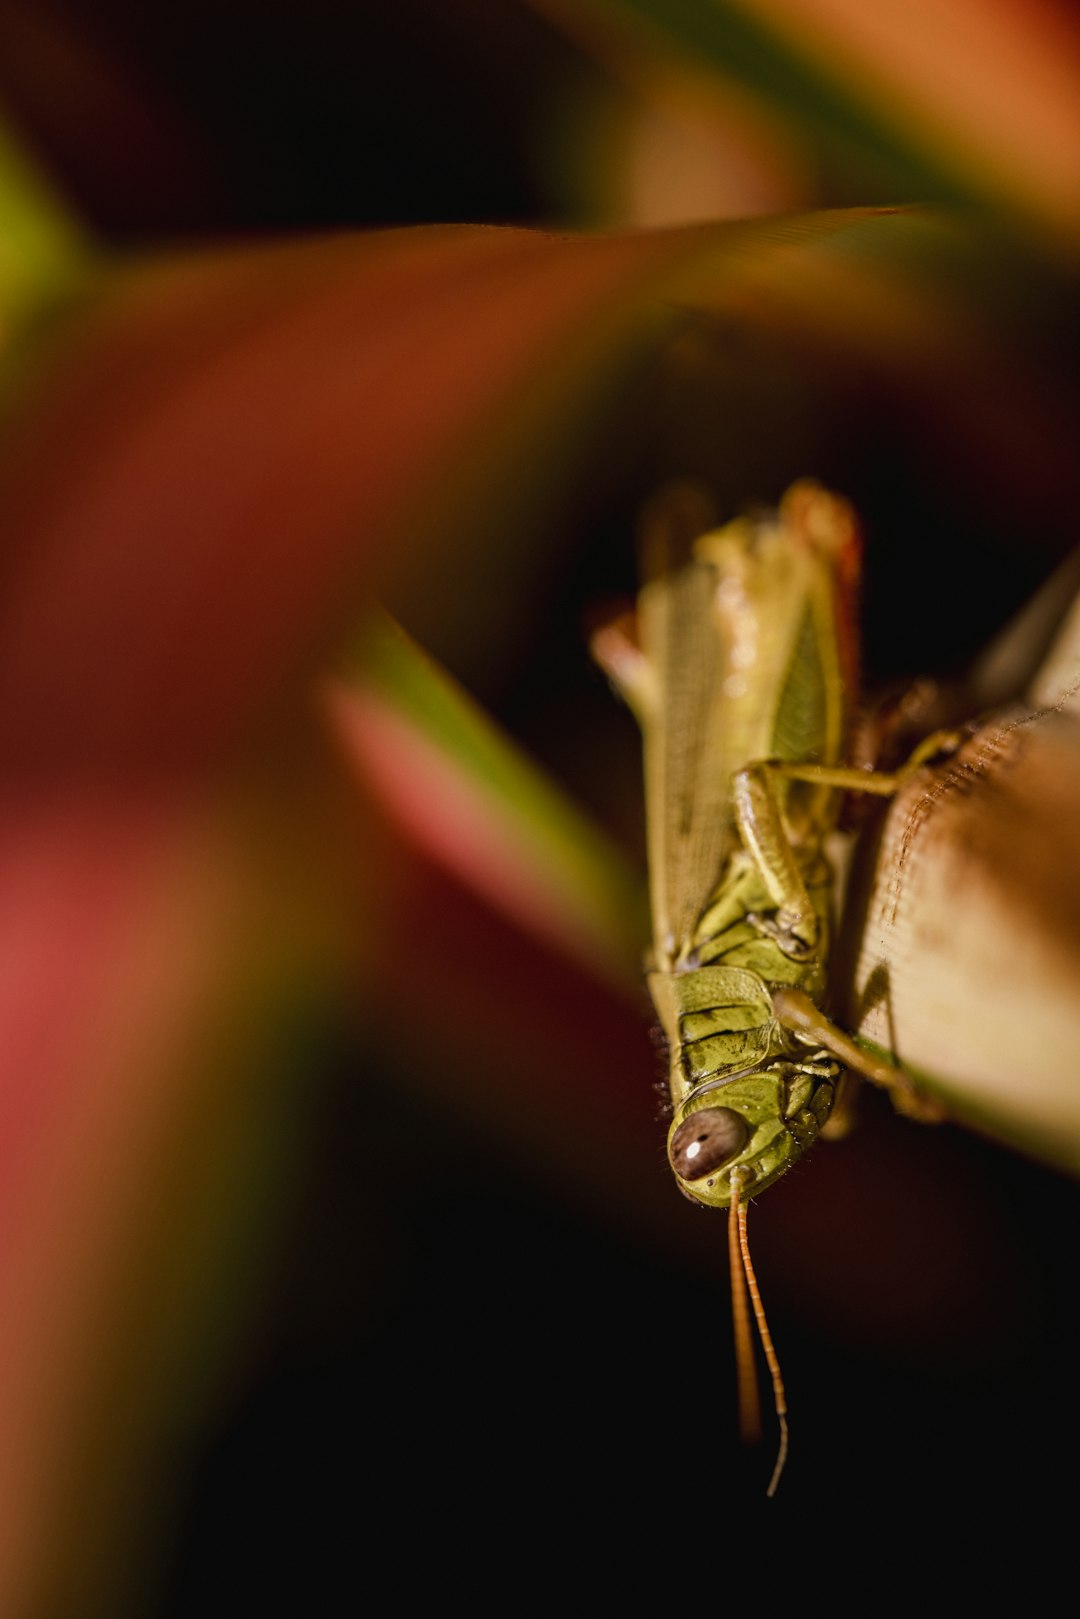 green grasshopper perched on brown stem in close up photography during daytime